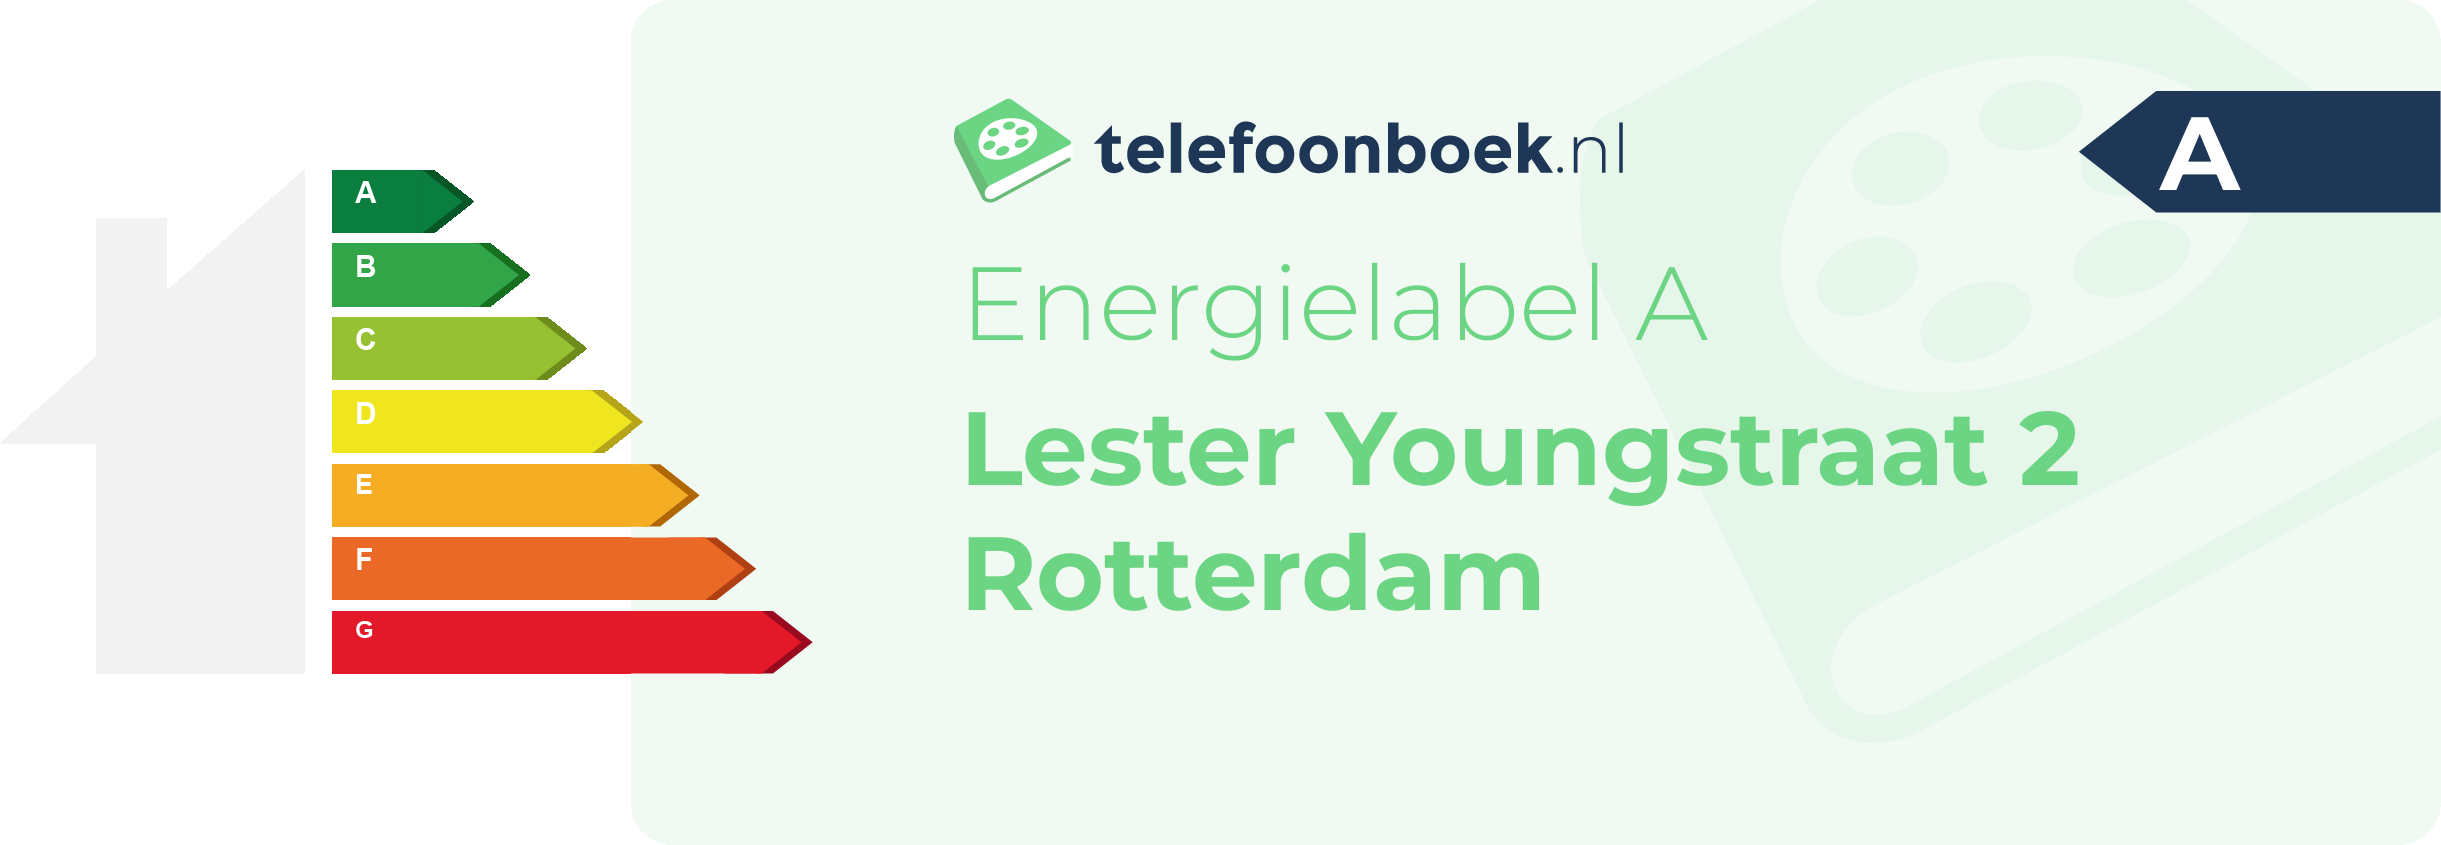 Energielabel Lester Youngstraat 2 Rotterdam